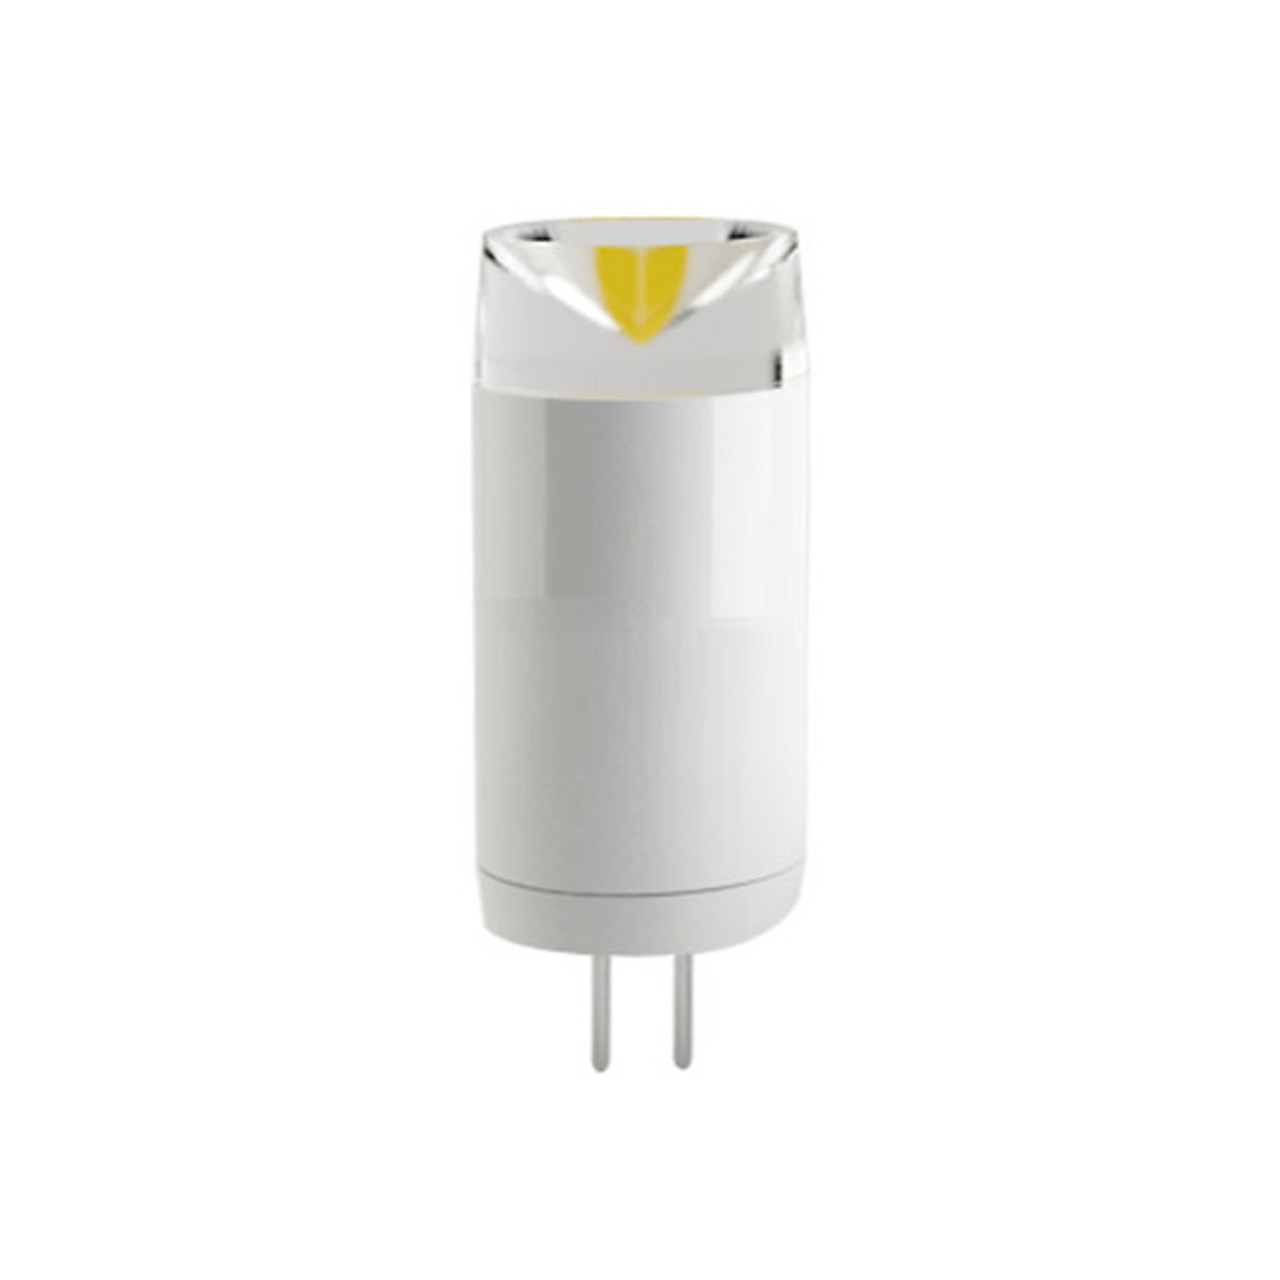 DISC LED G4 2.5W, Non-dimmable, 80+CRI,